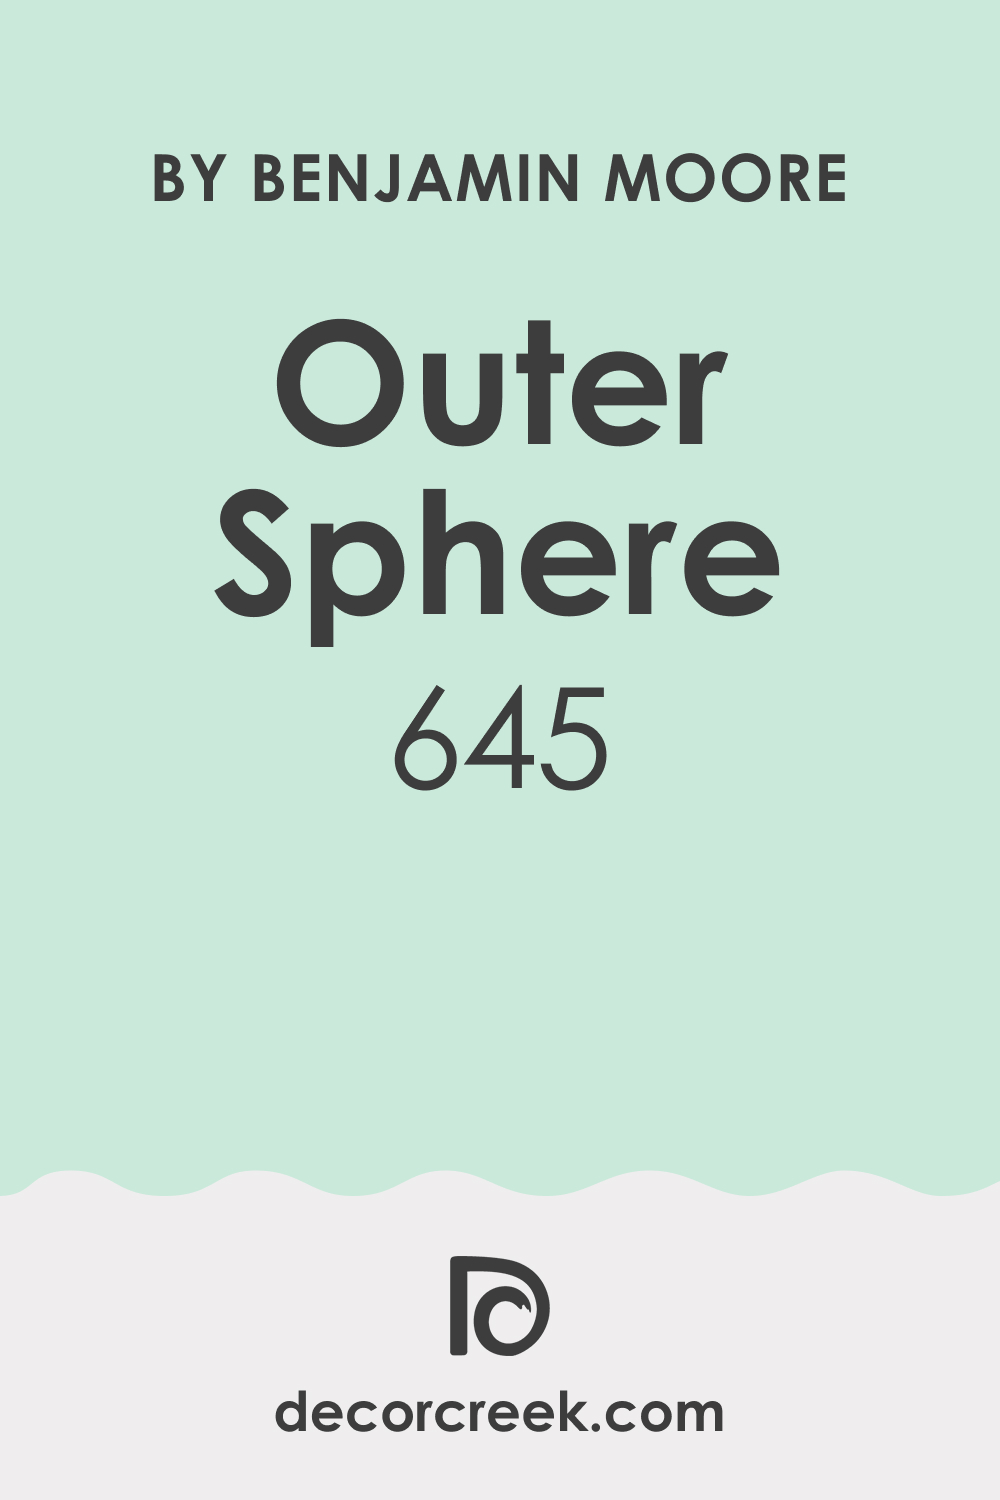 What Color Is Outer Sphere 645?